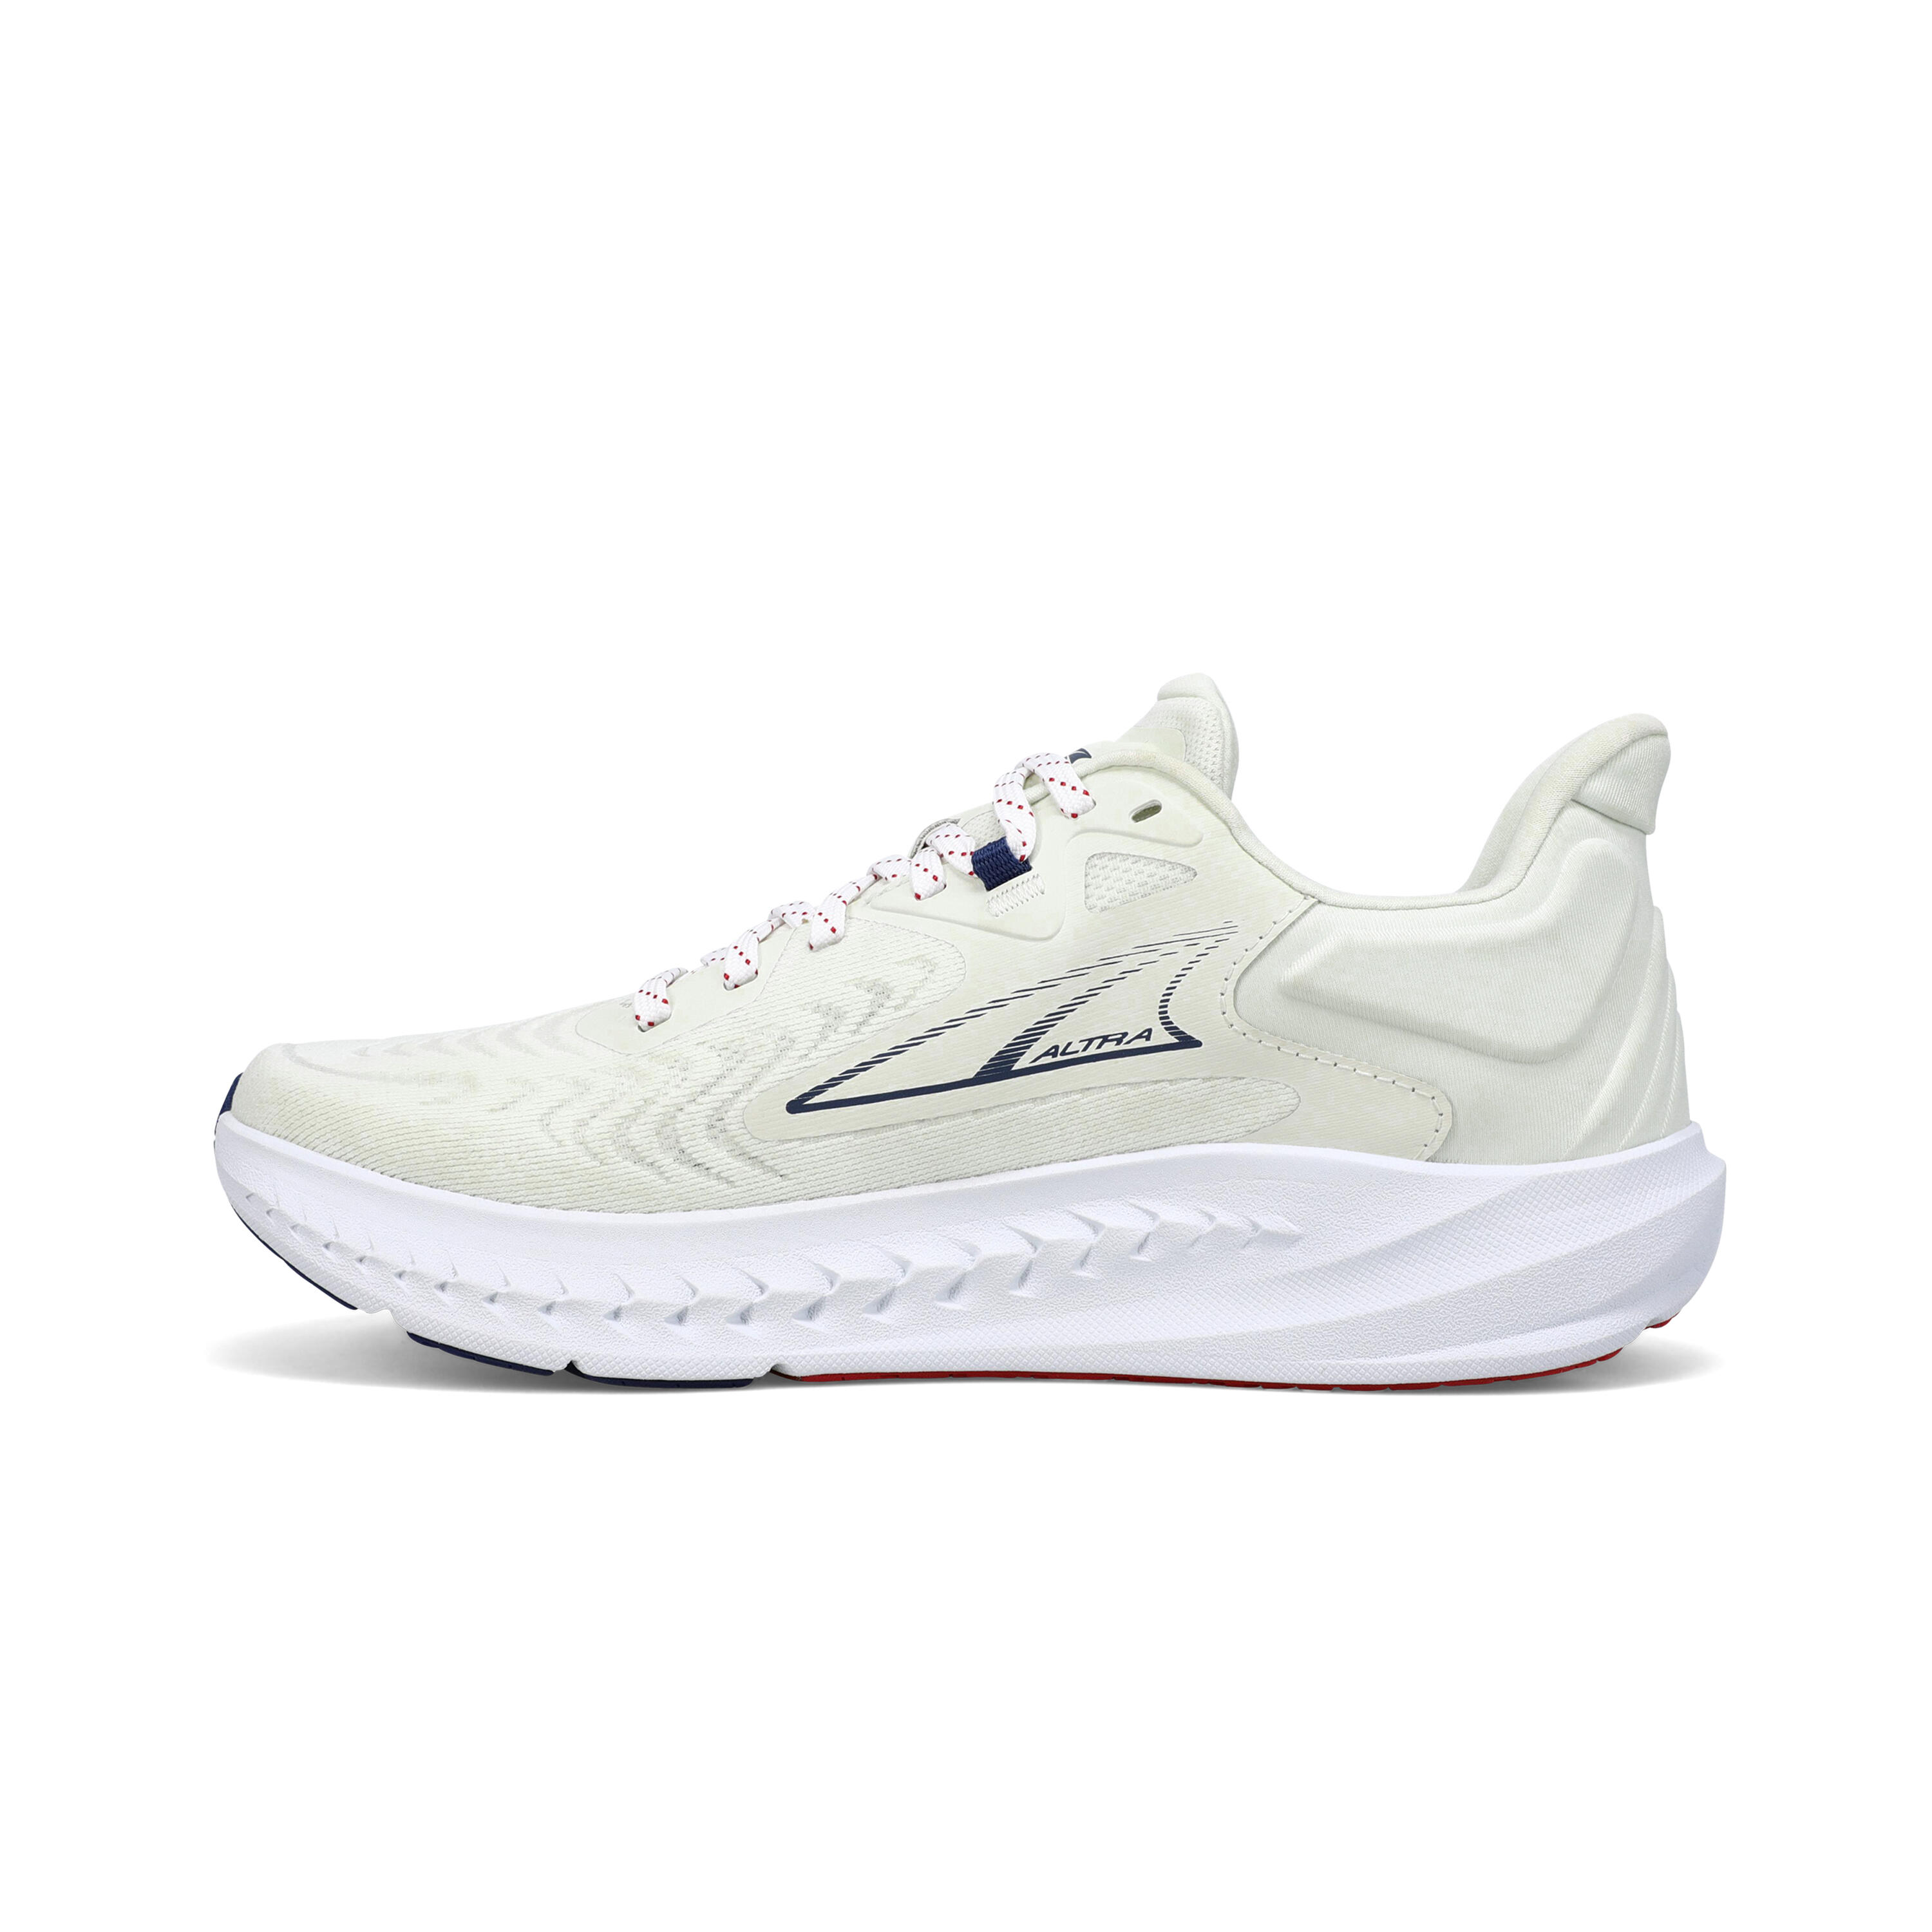 Altra Torin 7 Womens Running Shoes White 3/4